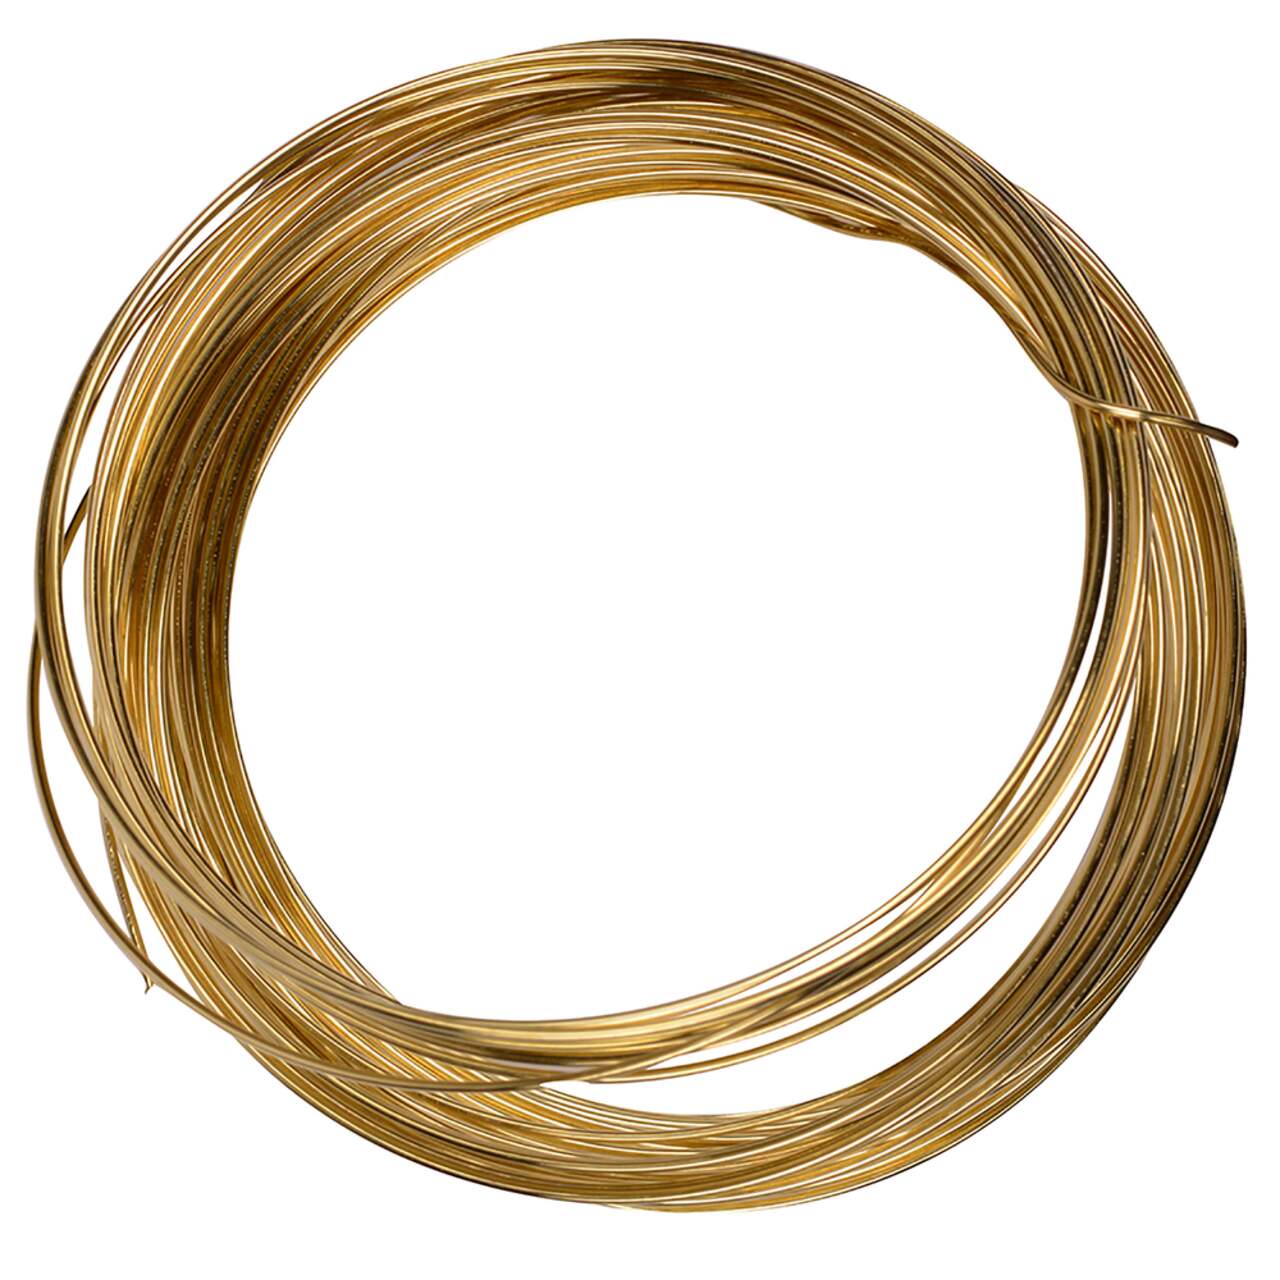 24 Ga Solid Bronze Wire 100' Spool (Pack of 1)